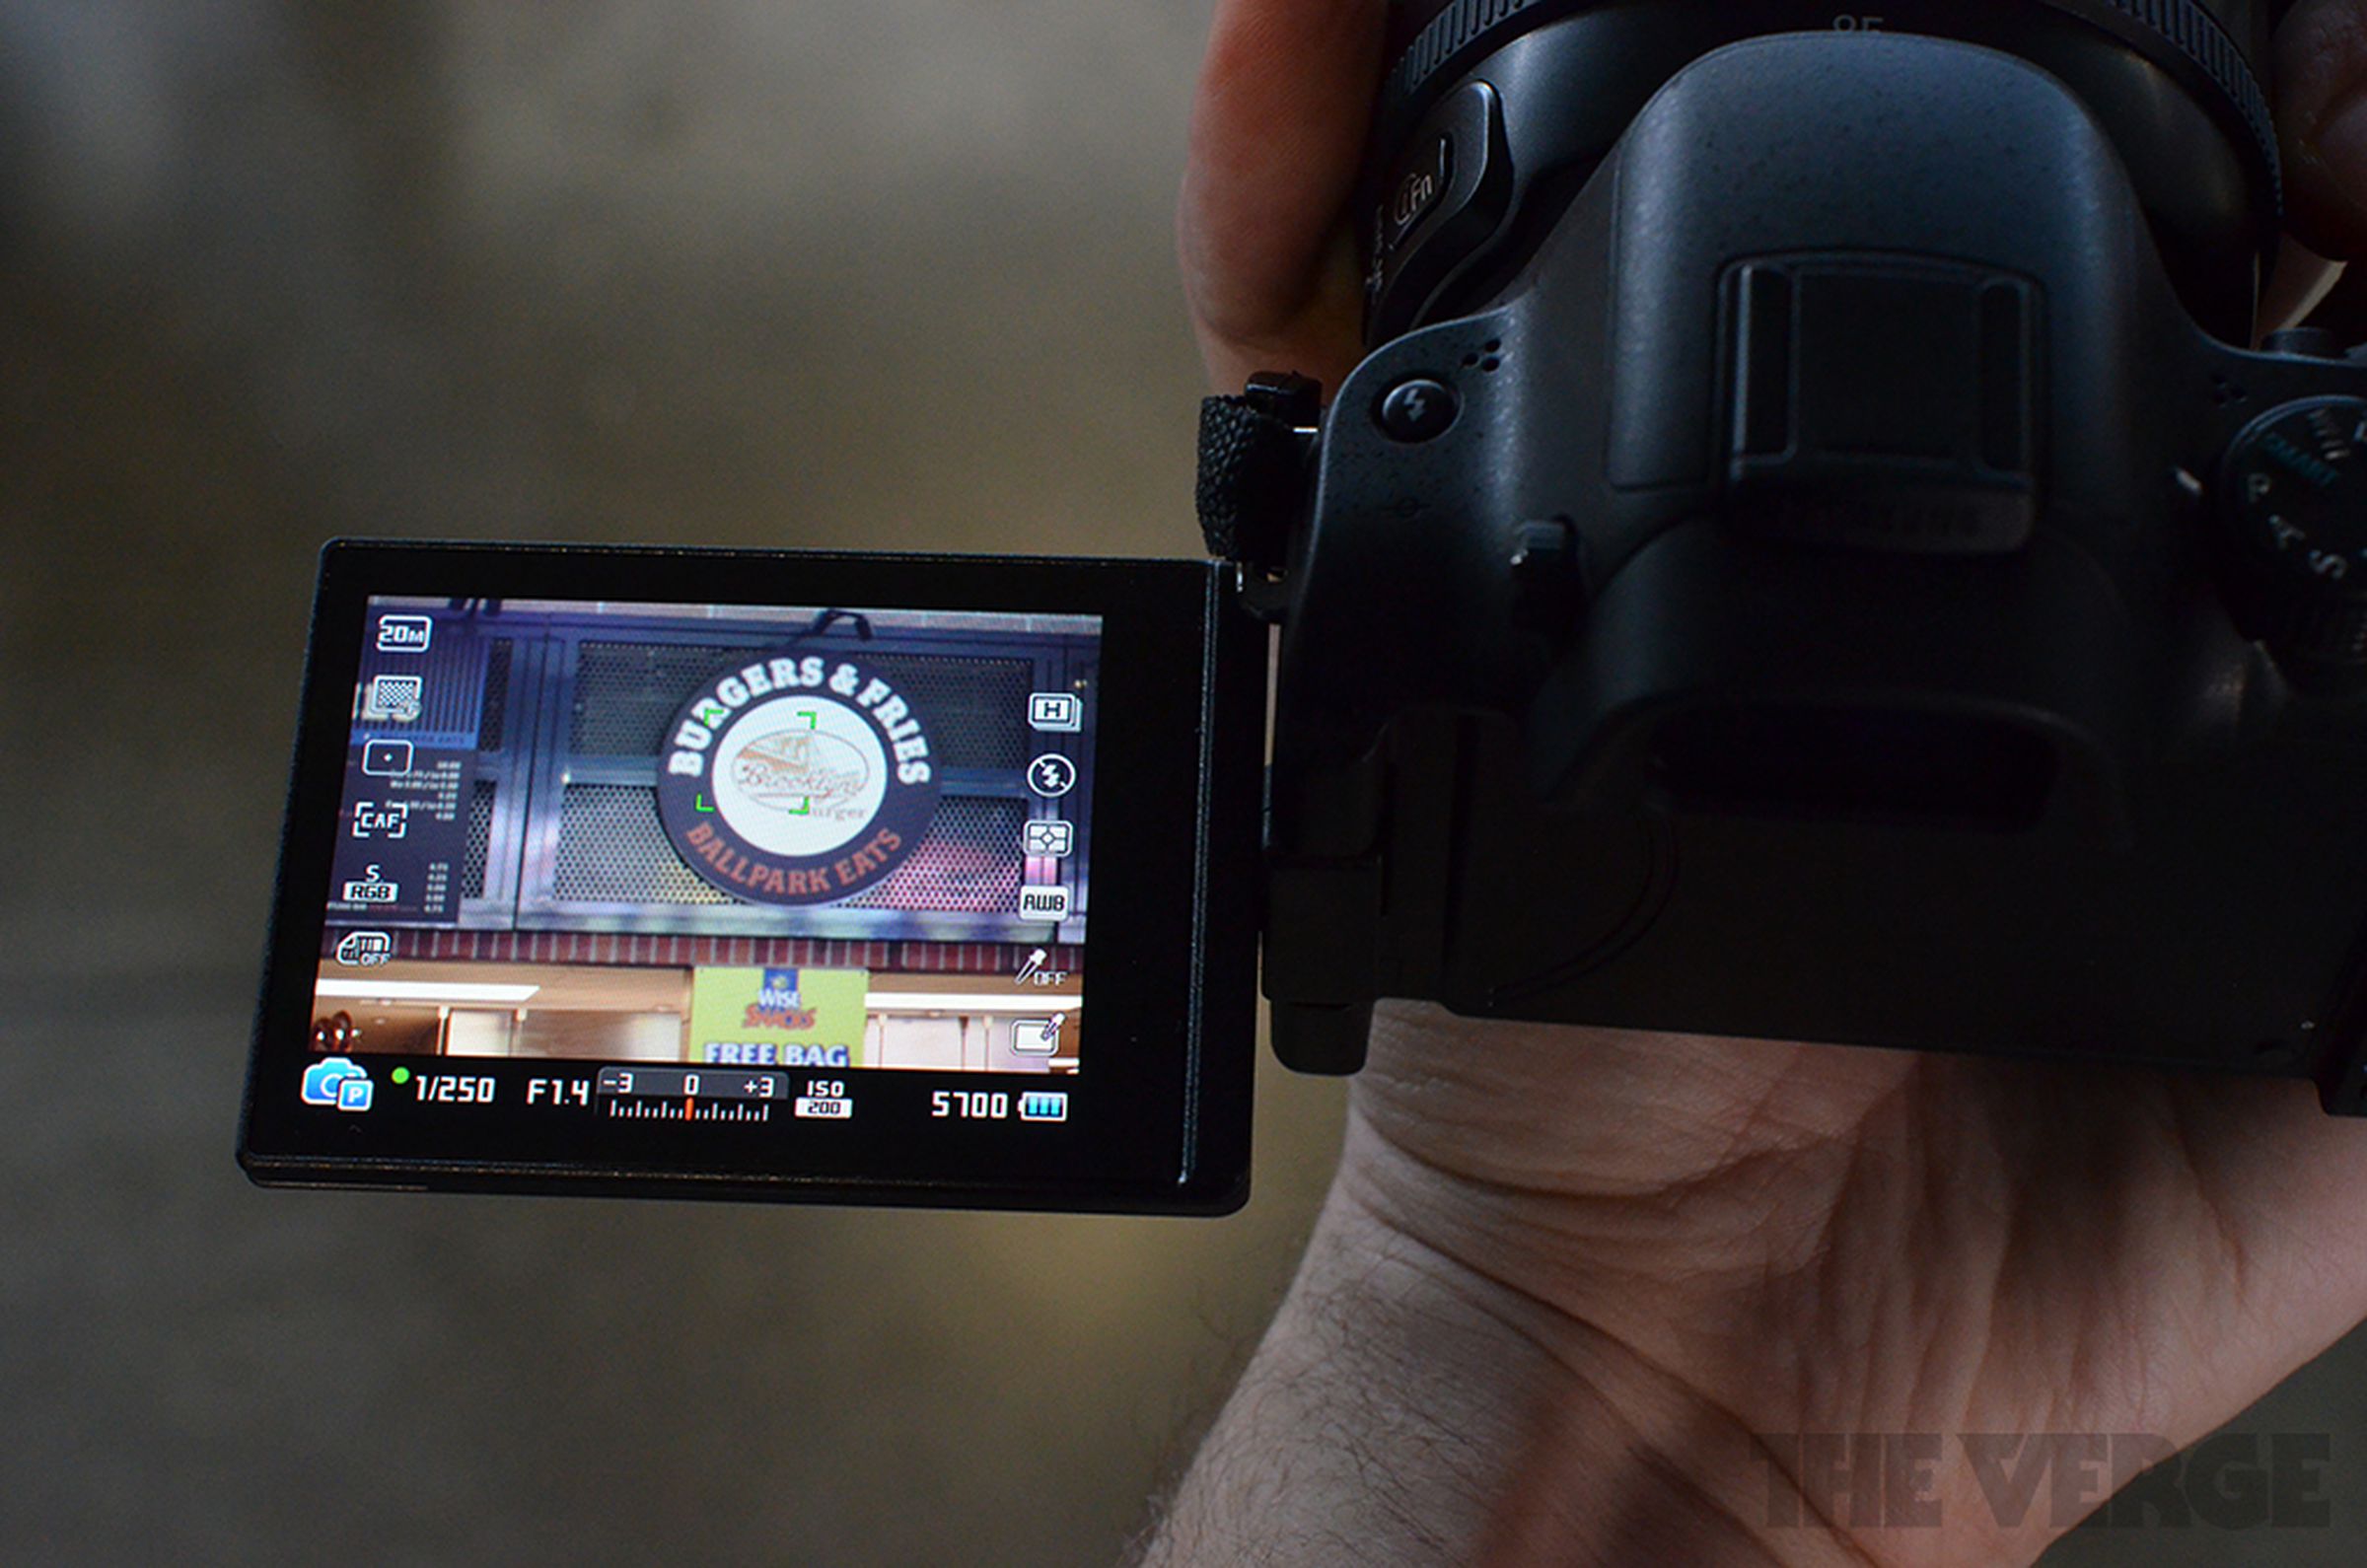 Samsung NX20 hands-on pictures